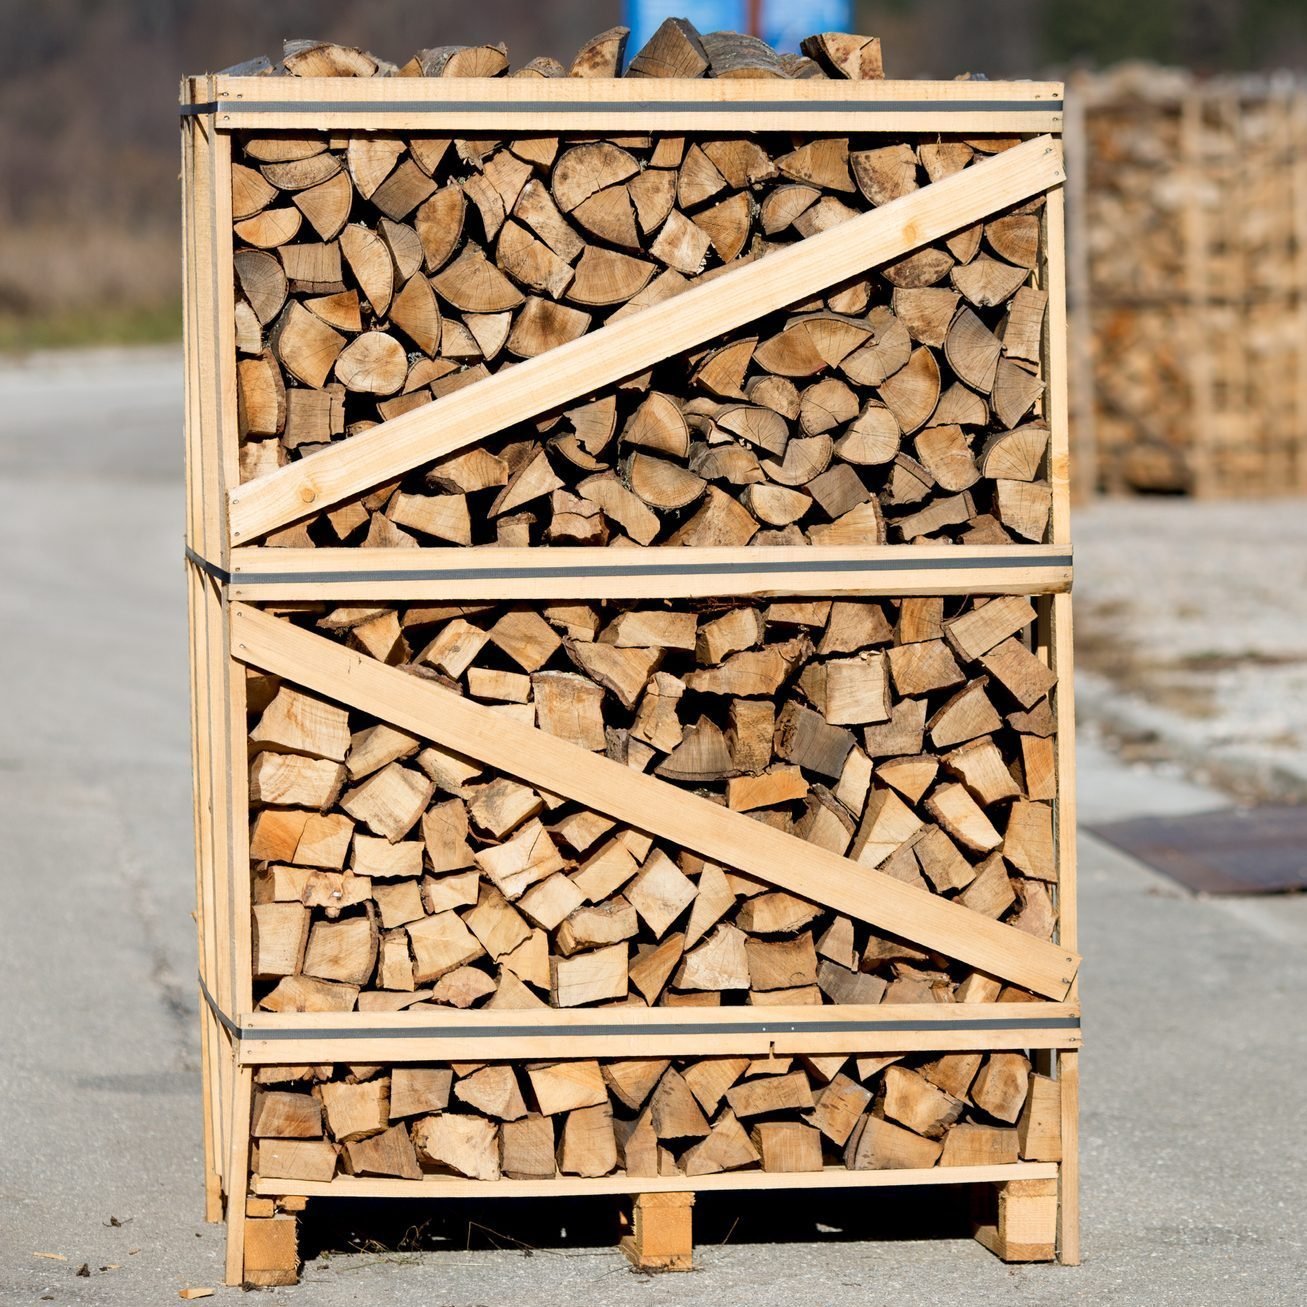 Firewood Measurements What Do They, How Much Does A Bundle Of Hardwood Flooring Weight